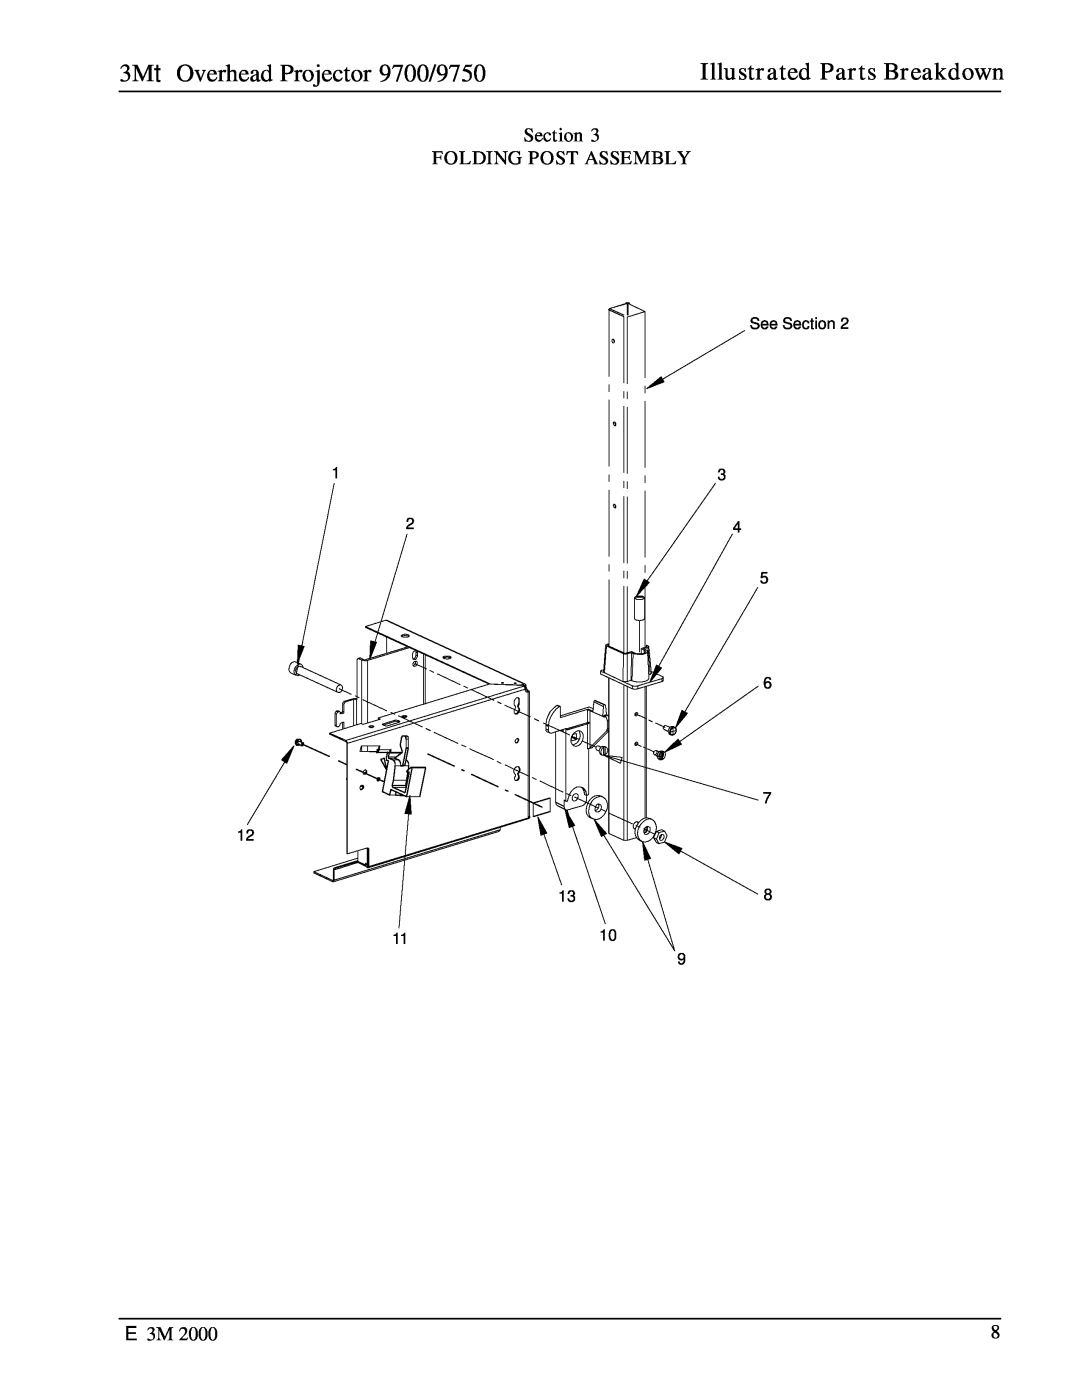 3M manual Section FOLDING POST ASSEMBLY, 3MtOverhead Projector 9700/9750, Illustrated Parts Breakdown 